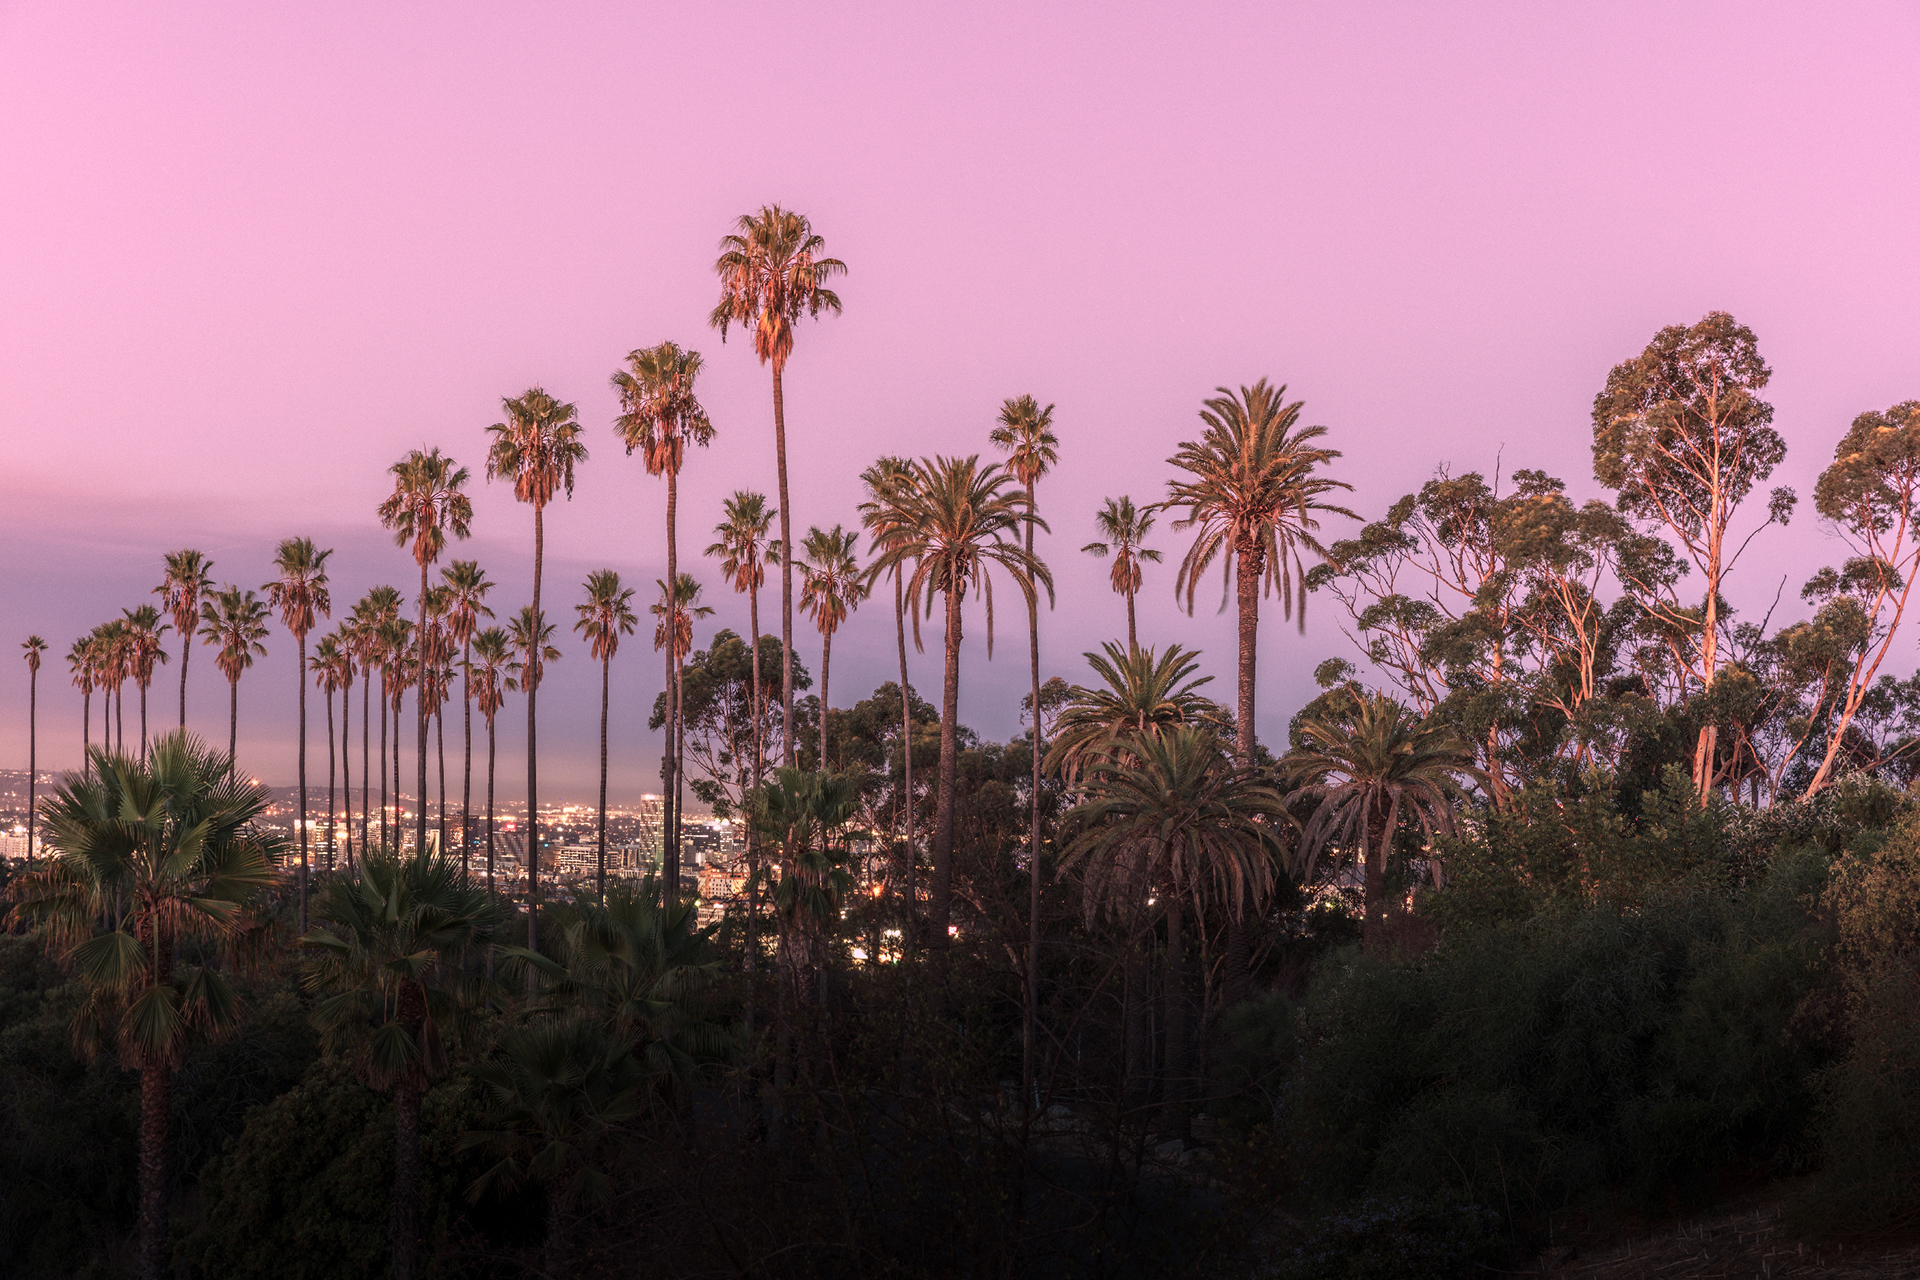 Digital Photography: Los Angeles, California with Ludwig Favre